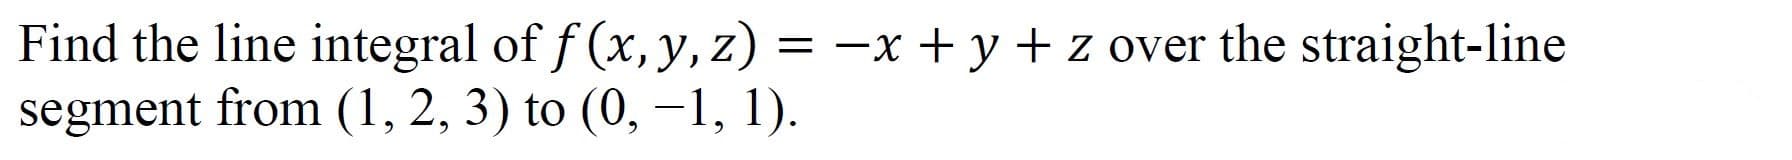 Find the line integral of f (x, y, z) = -x + y + z over the straight-line
segment from (1, 2, 3) to (0, –1 1).
